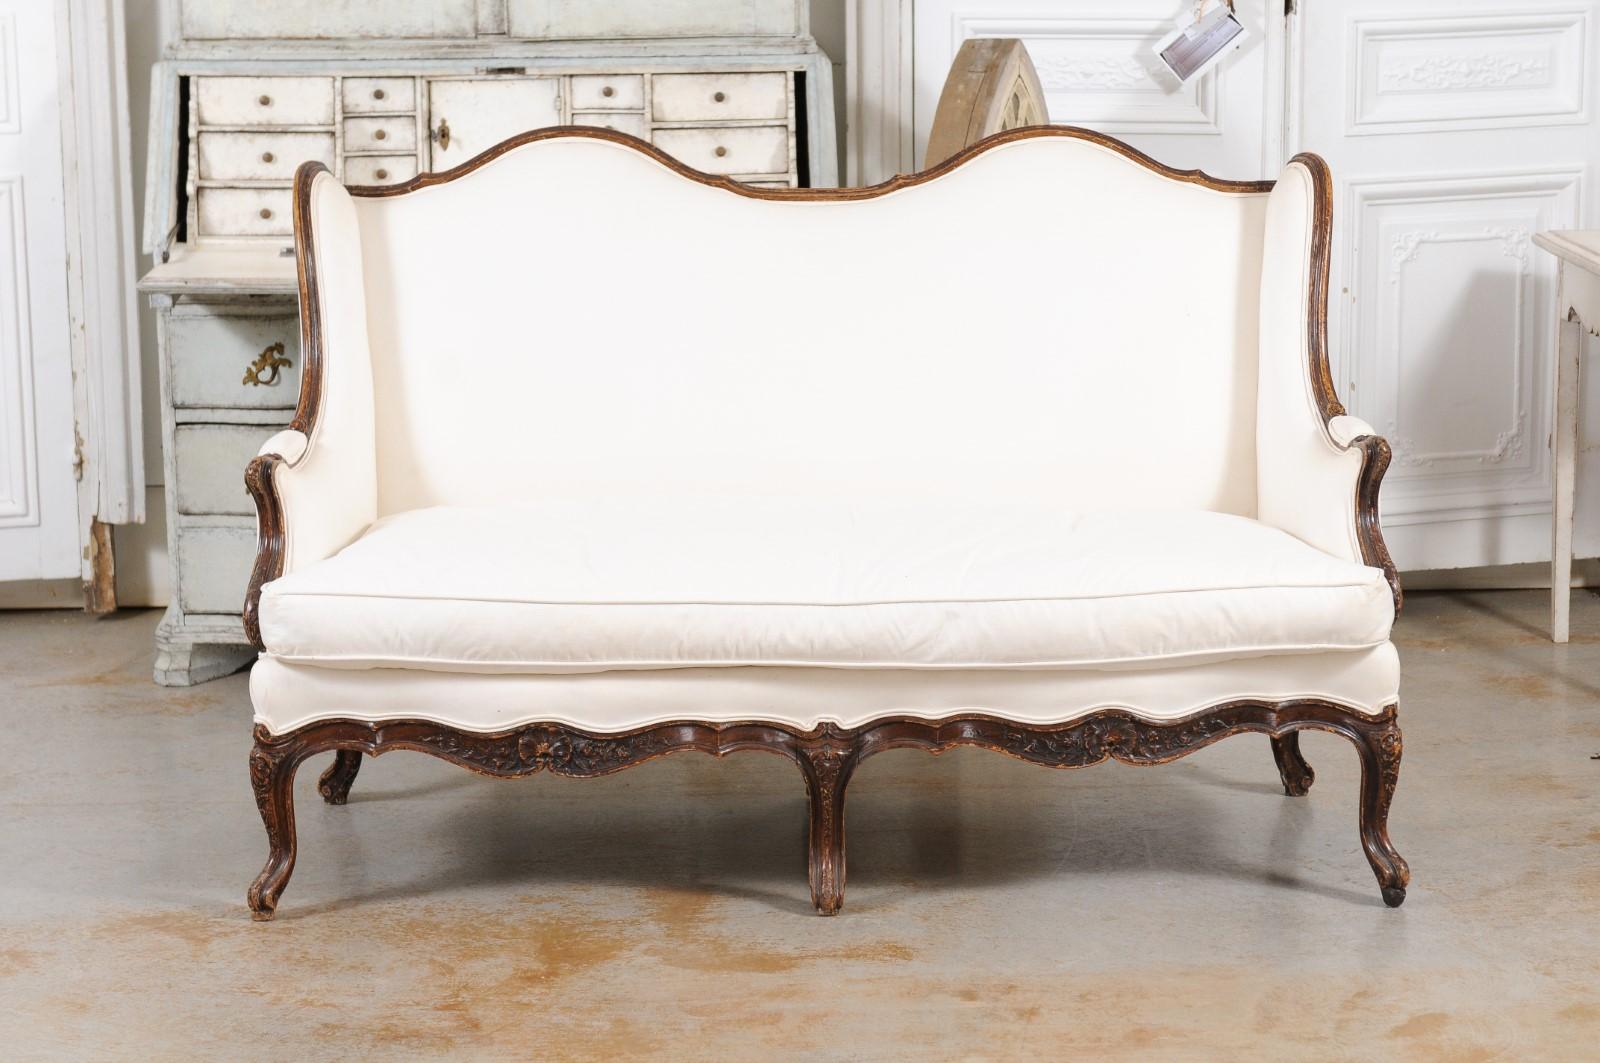 A French Louis XV style walnut canapé à oreilles from the late 19th century, with double camelback, cabriole legs and upholstery. Created in France during the later years of the 19th century, this two-seat canapé features a slightly slanted back